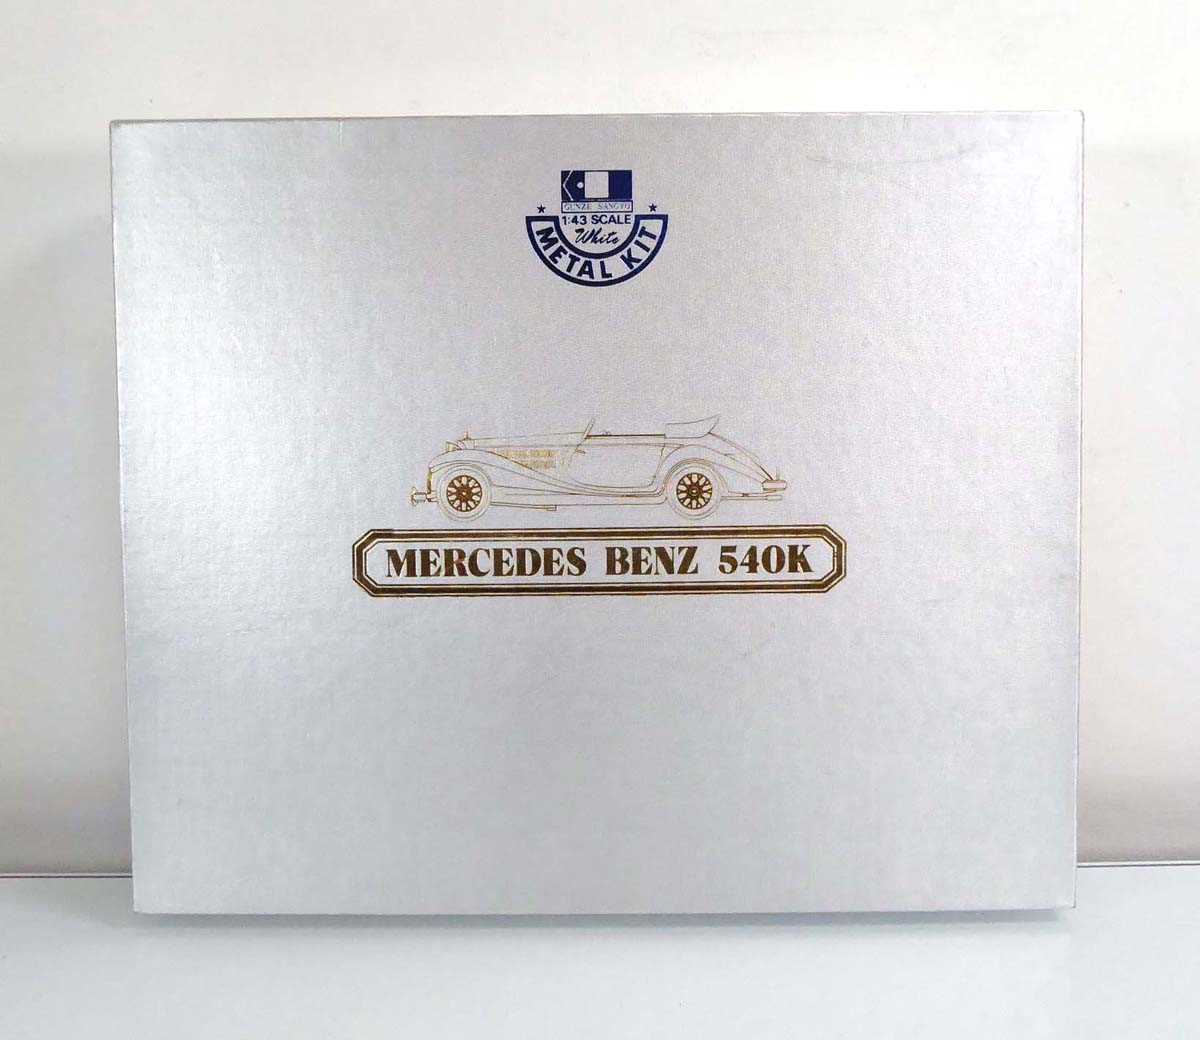 A Gunze Sangyo 1:43 scale Mercedes Benz 540K white metal kit, boxed We do not know if this kit is